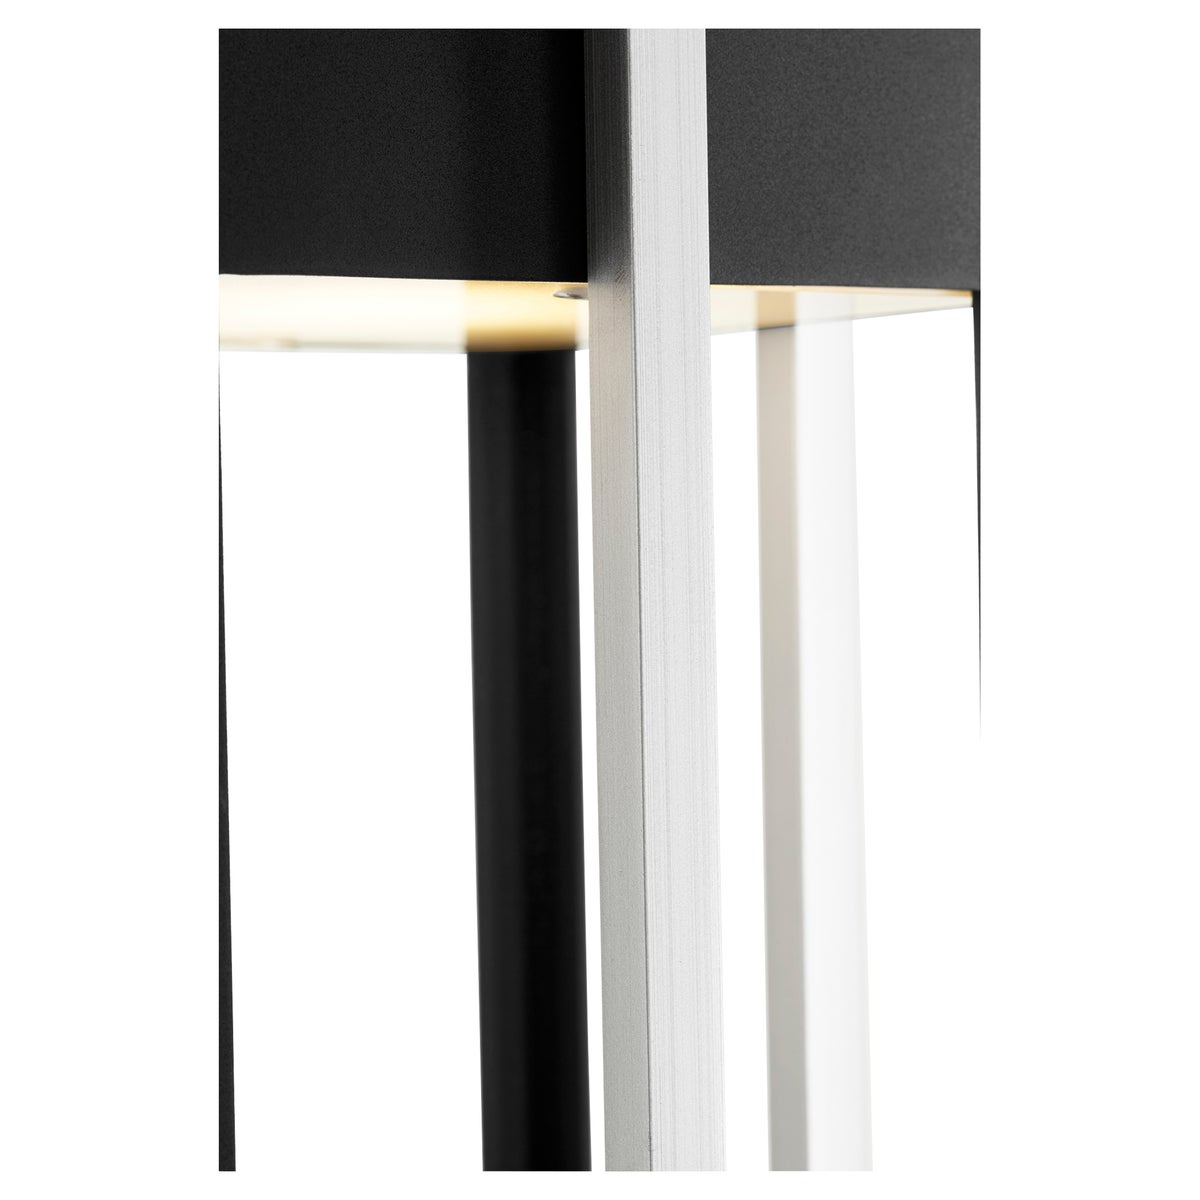 LED Outdoor Post Light with a unique geometric design, featuring a dual-layered frame in a two-toned noir/satin nickel finish. Provides guiding light for guests in contemporary outdoor settings. 7"W x 21.63"H. 11W LED, 465 lumens, 3000K color temperature. UL Listed for wet locations. 2-year warranty.